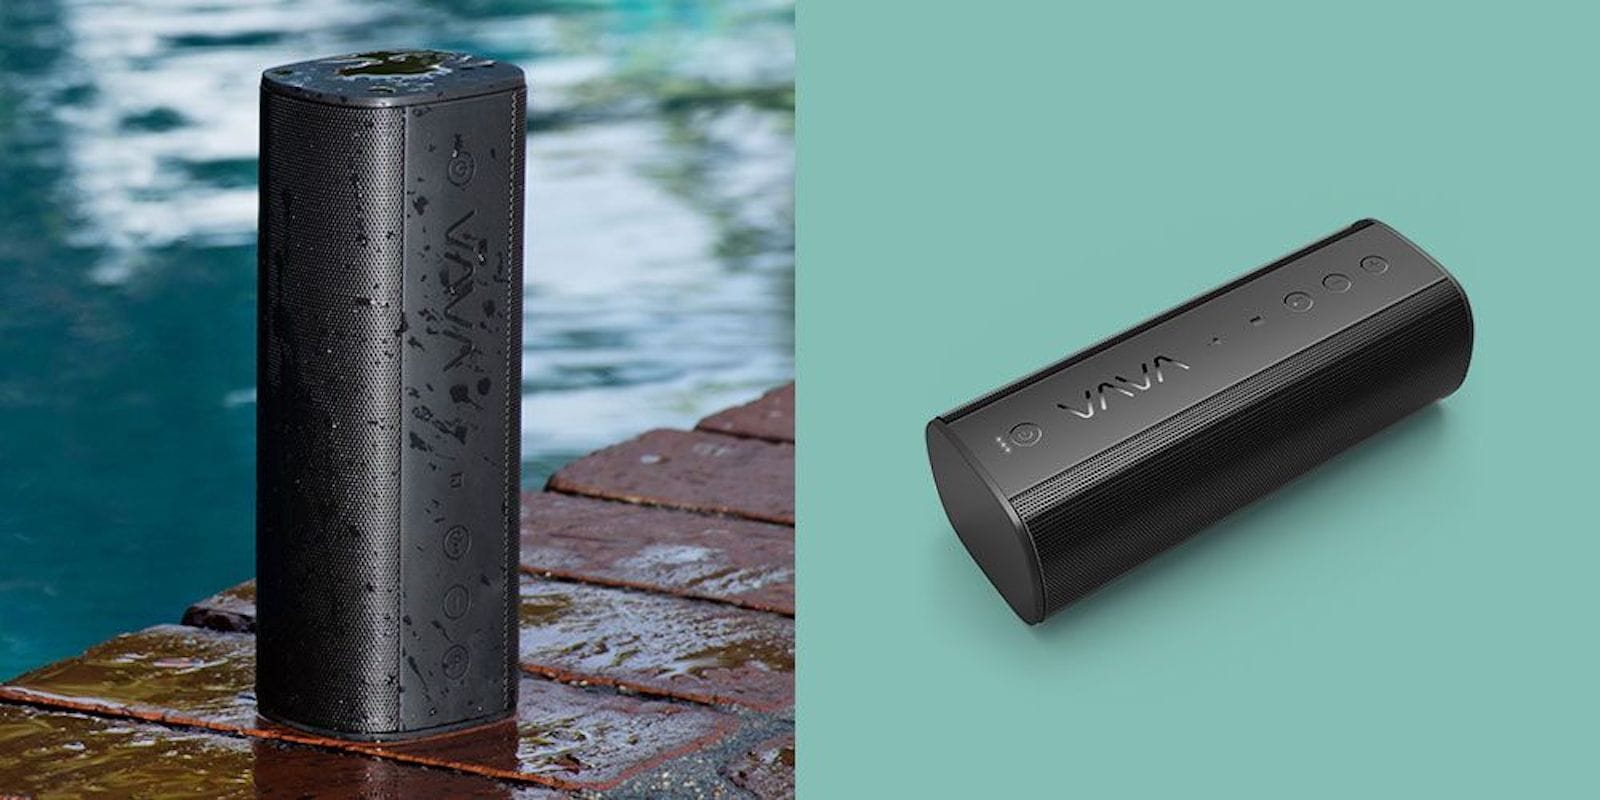 This slim, spill-proof Bluetooth speaker packs a punch, and the ability to charge your phone.